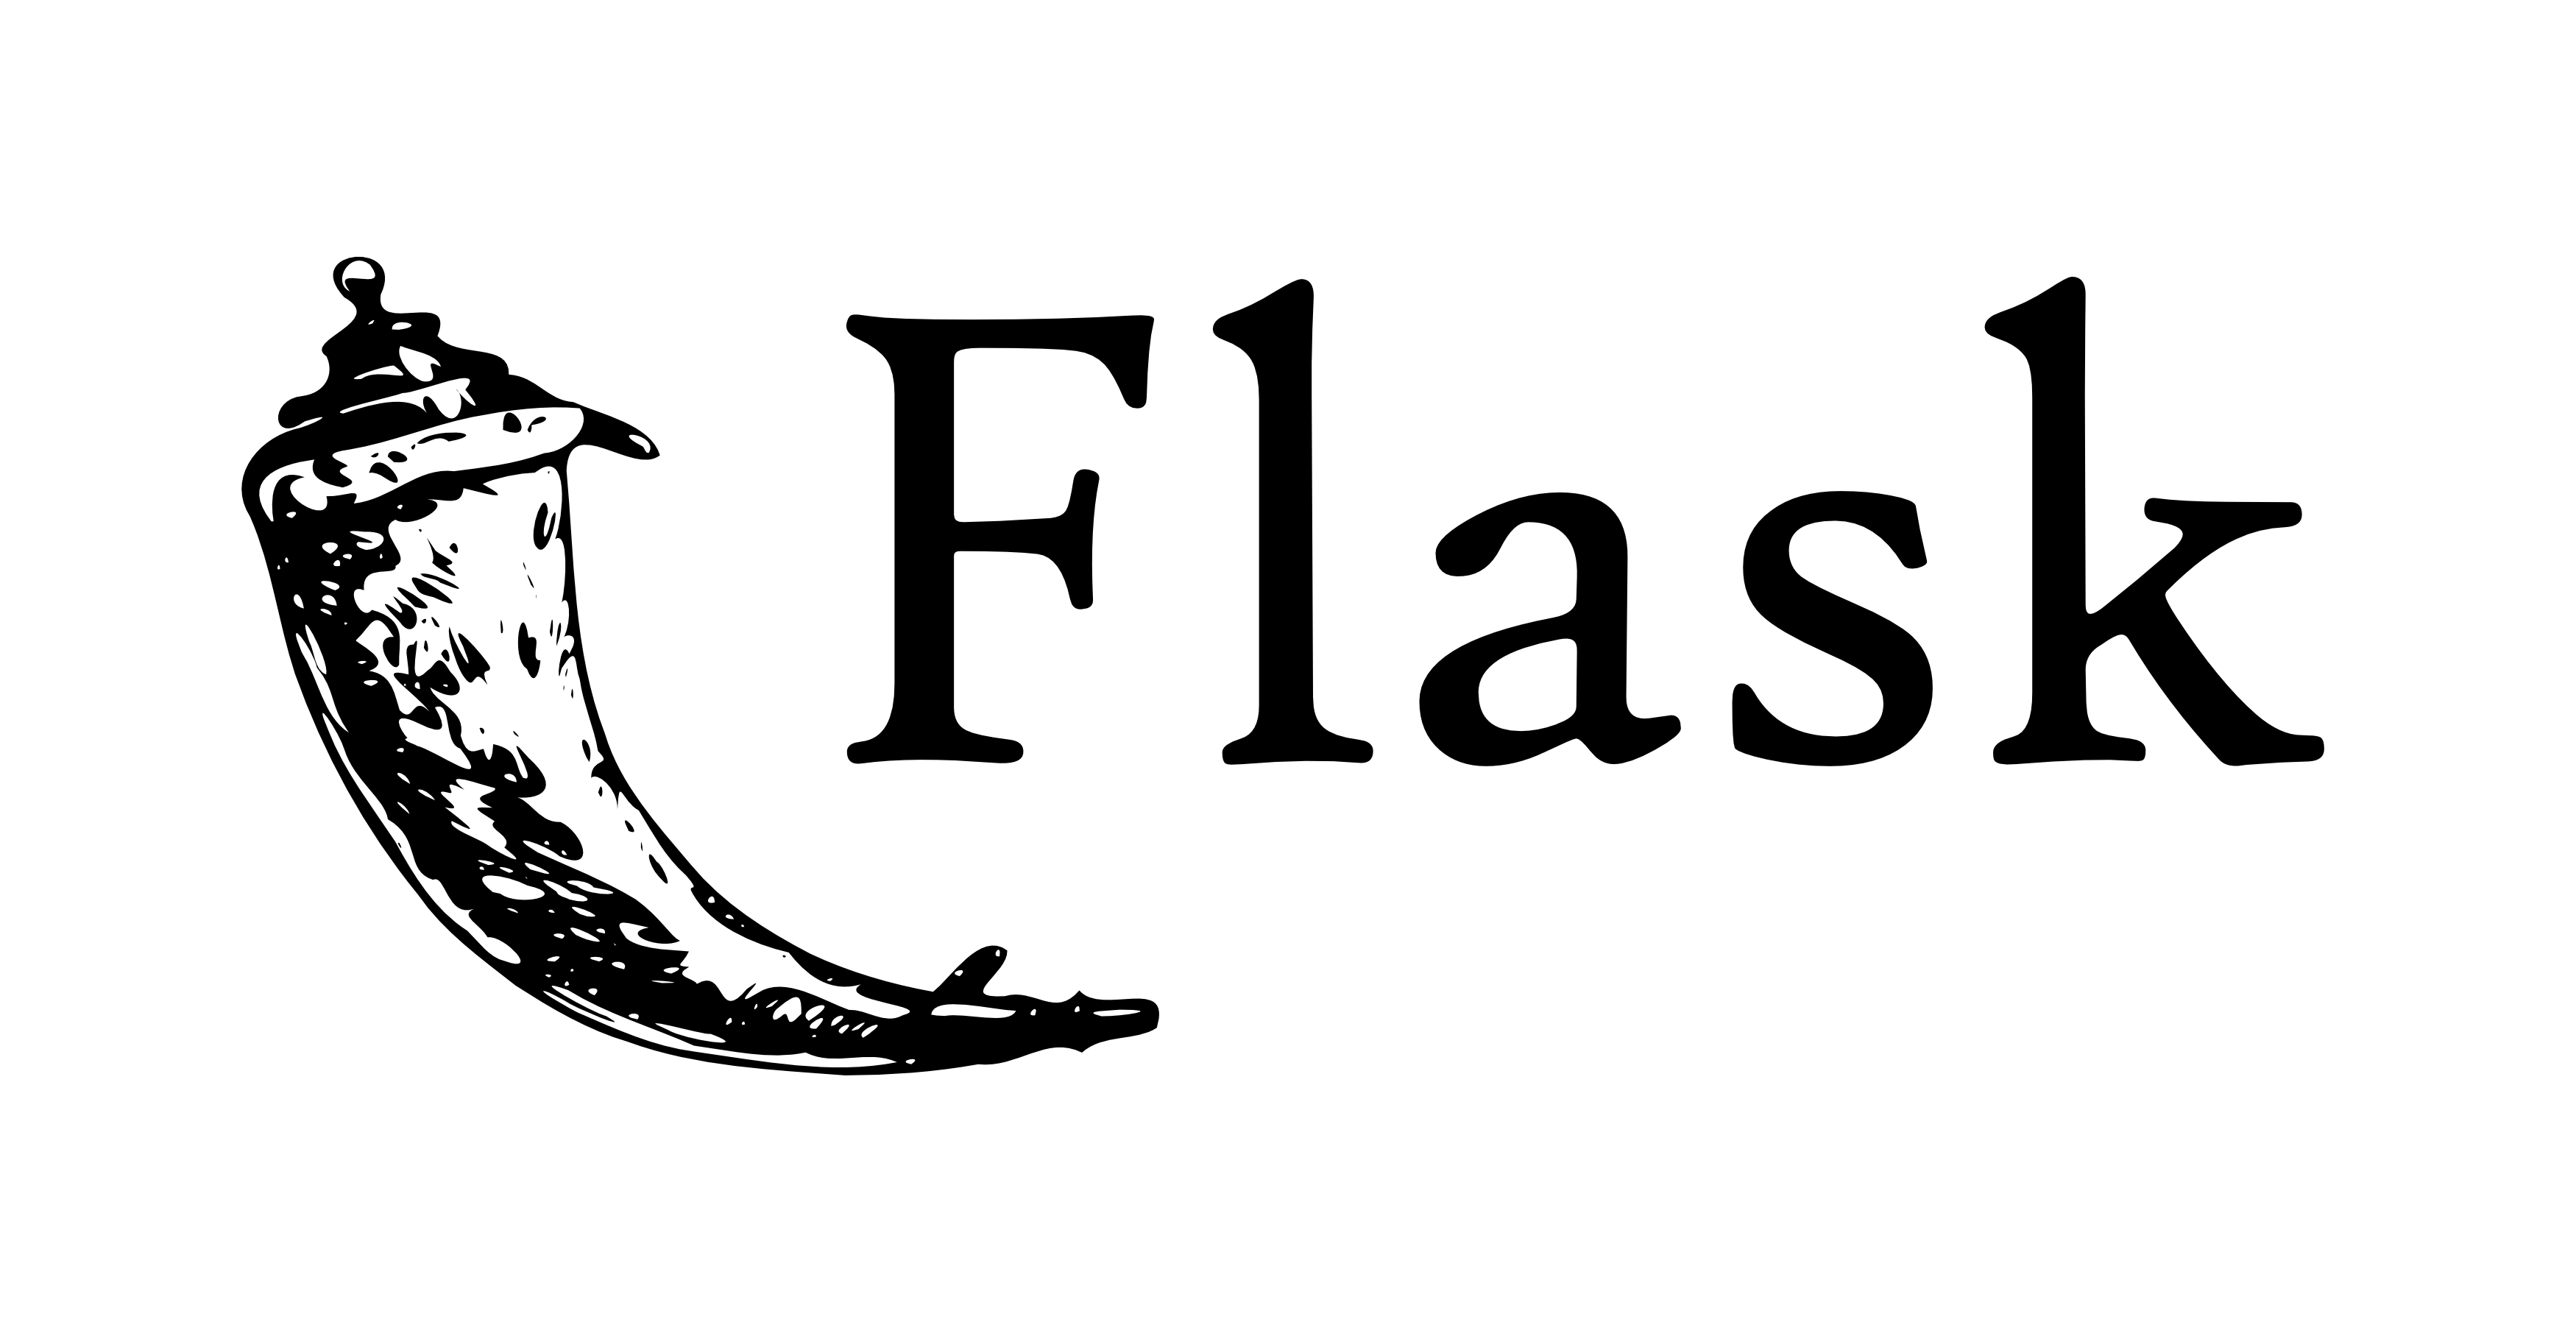 Building RESTful APIs with Flask and Python